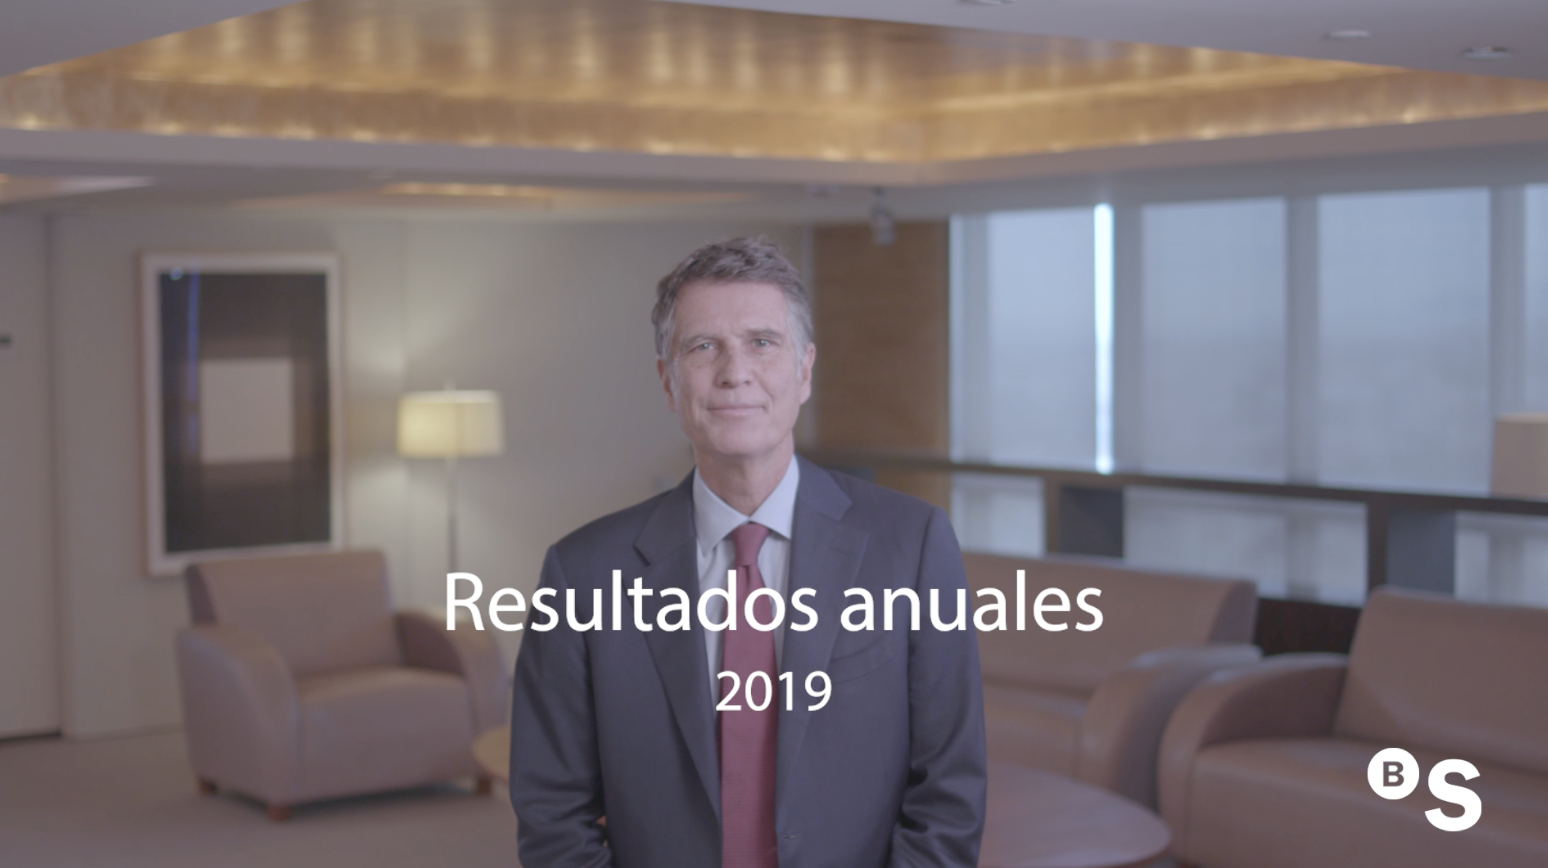 Banco Sabadell Annual 2019 results